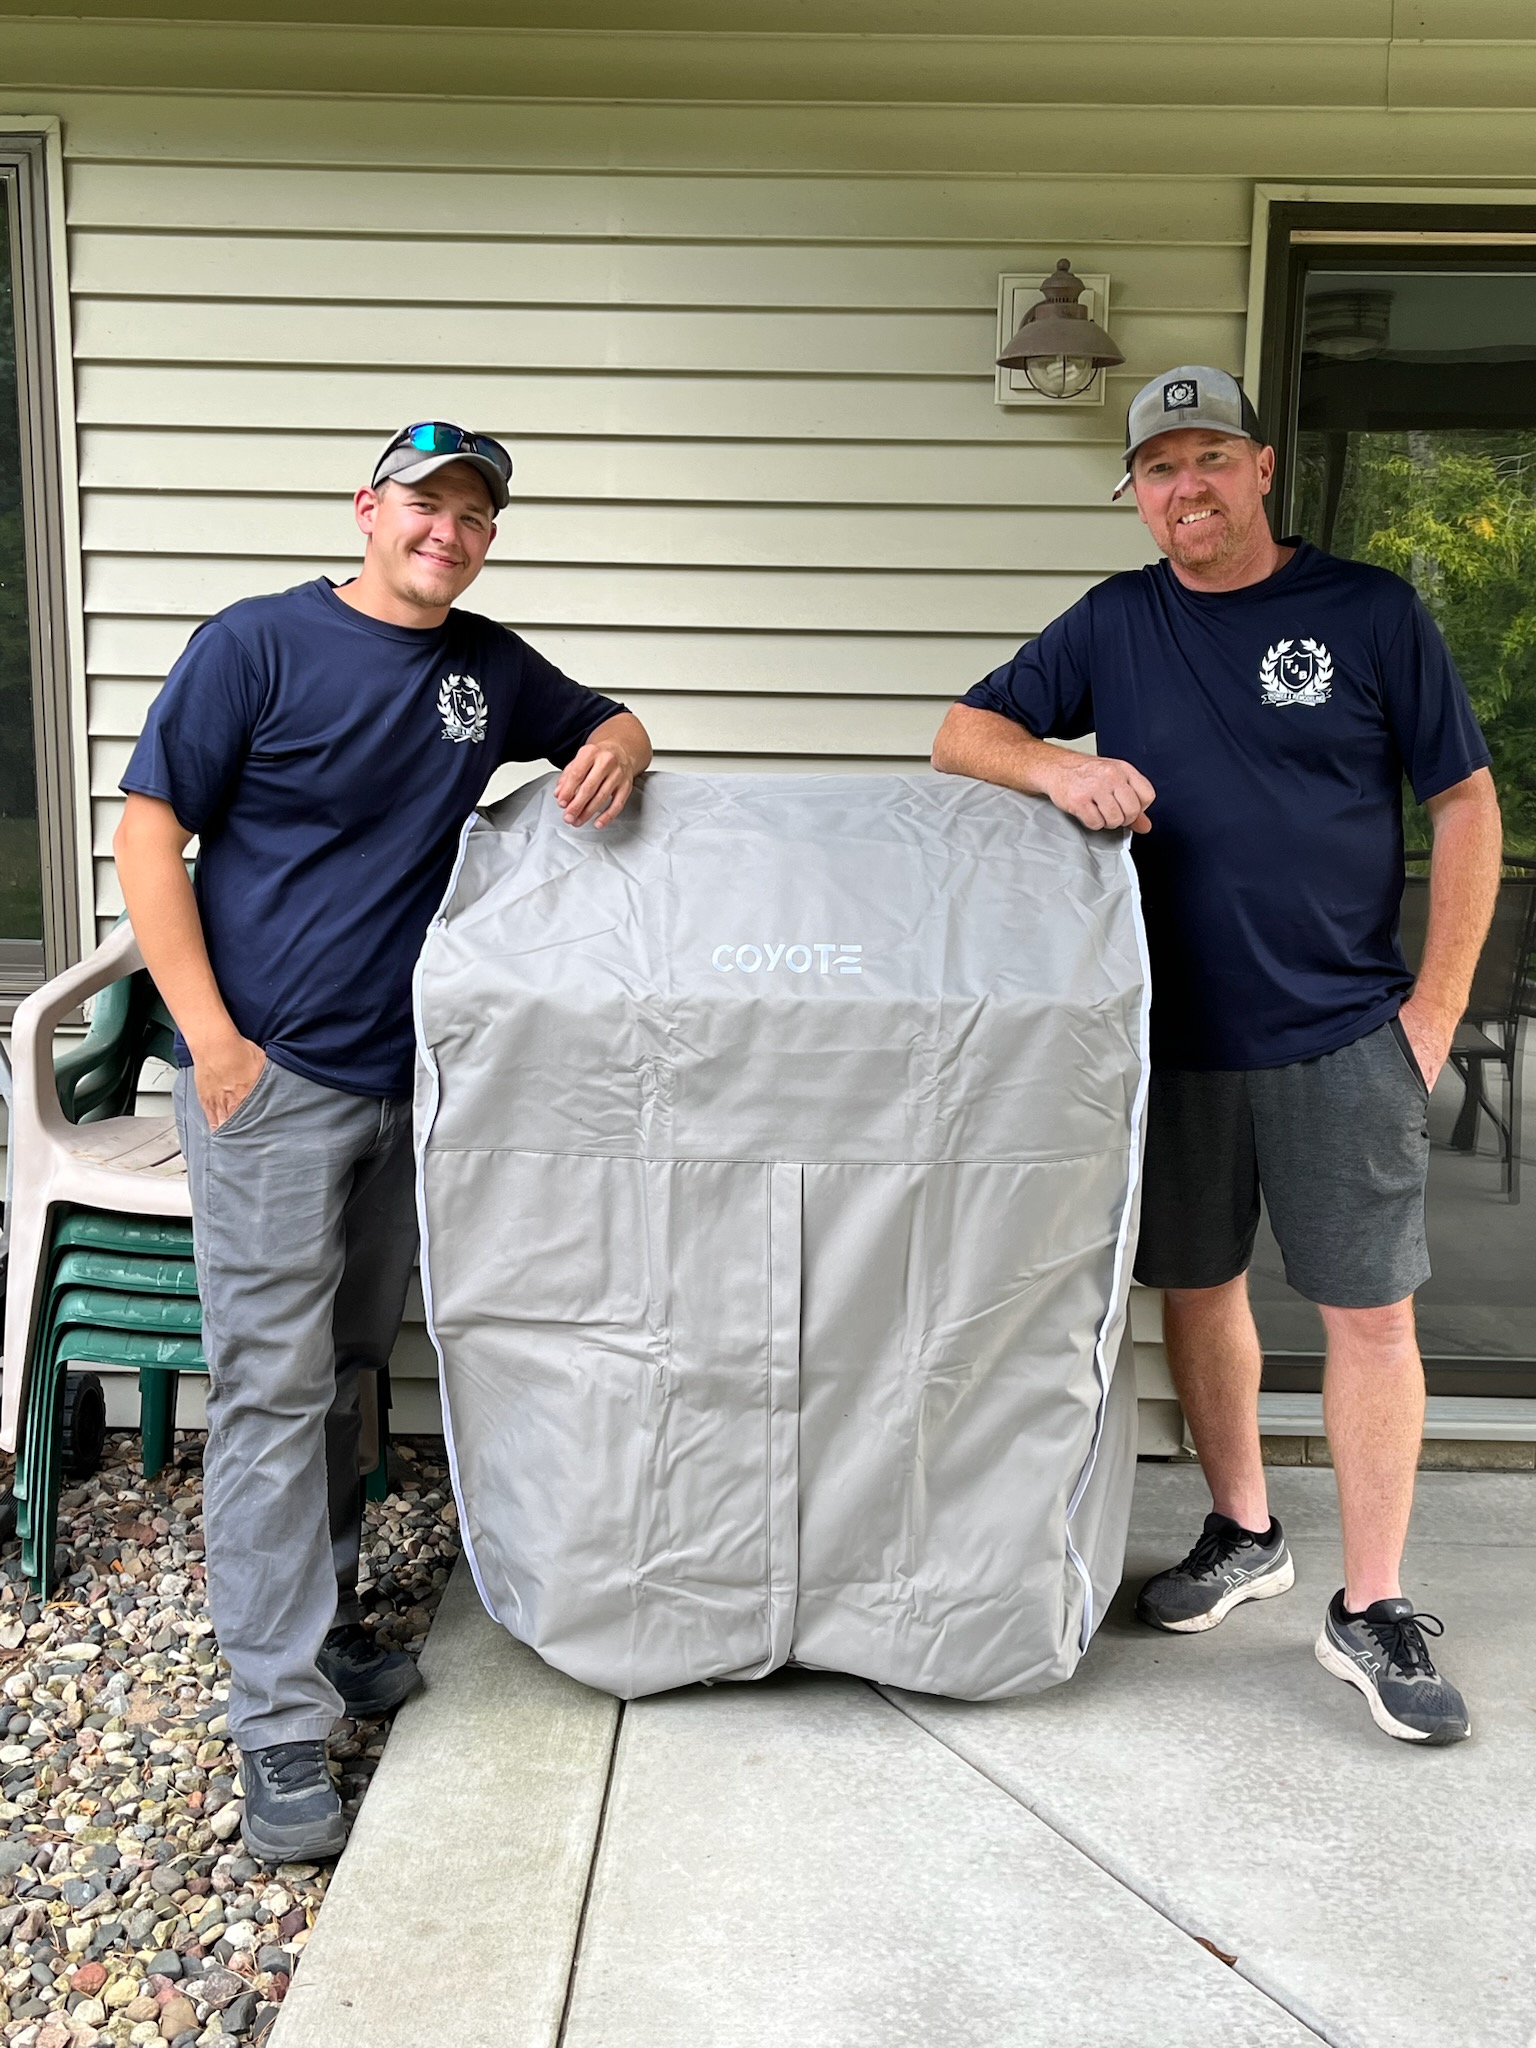 Jason and Joe delivered Coyote grill